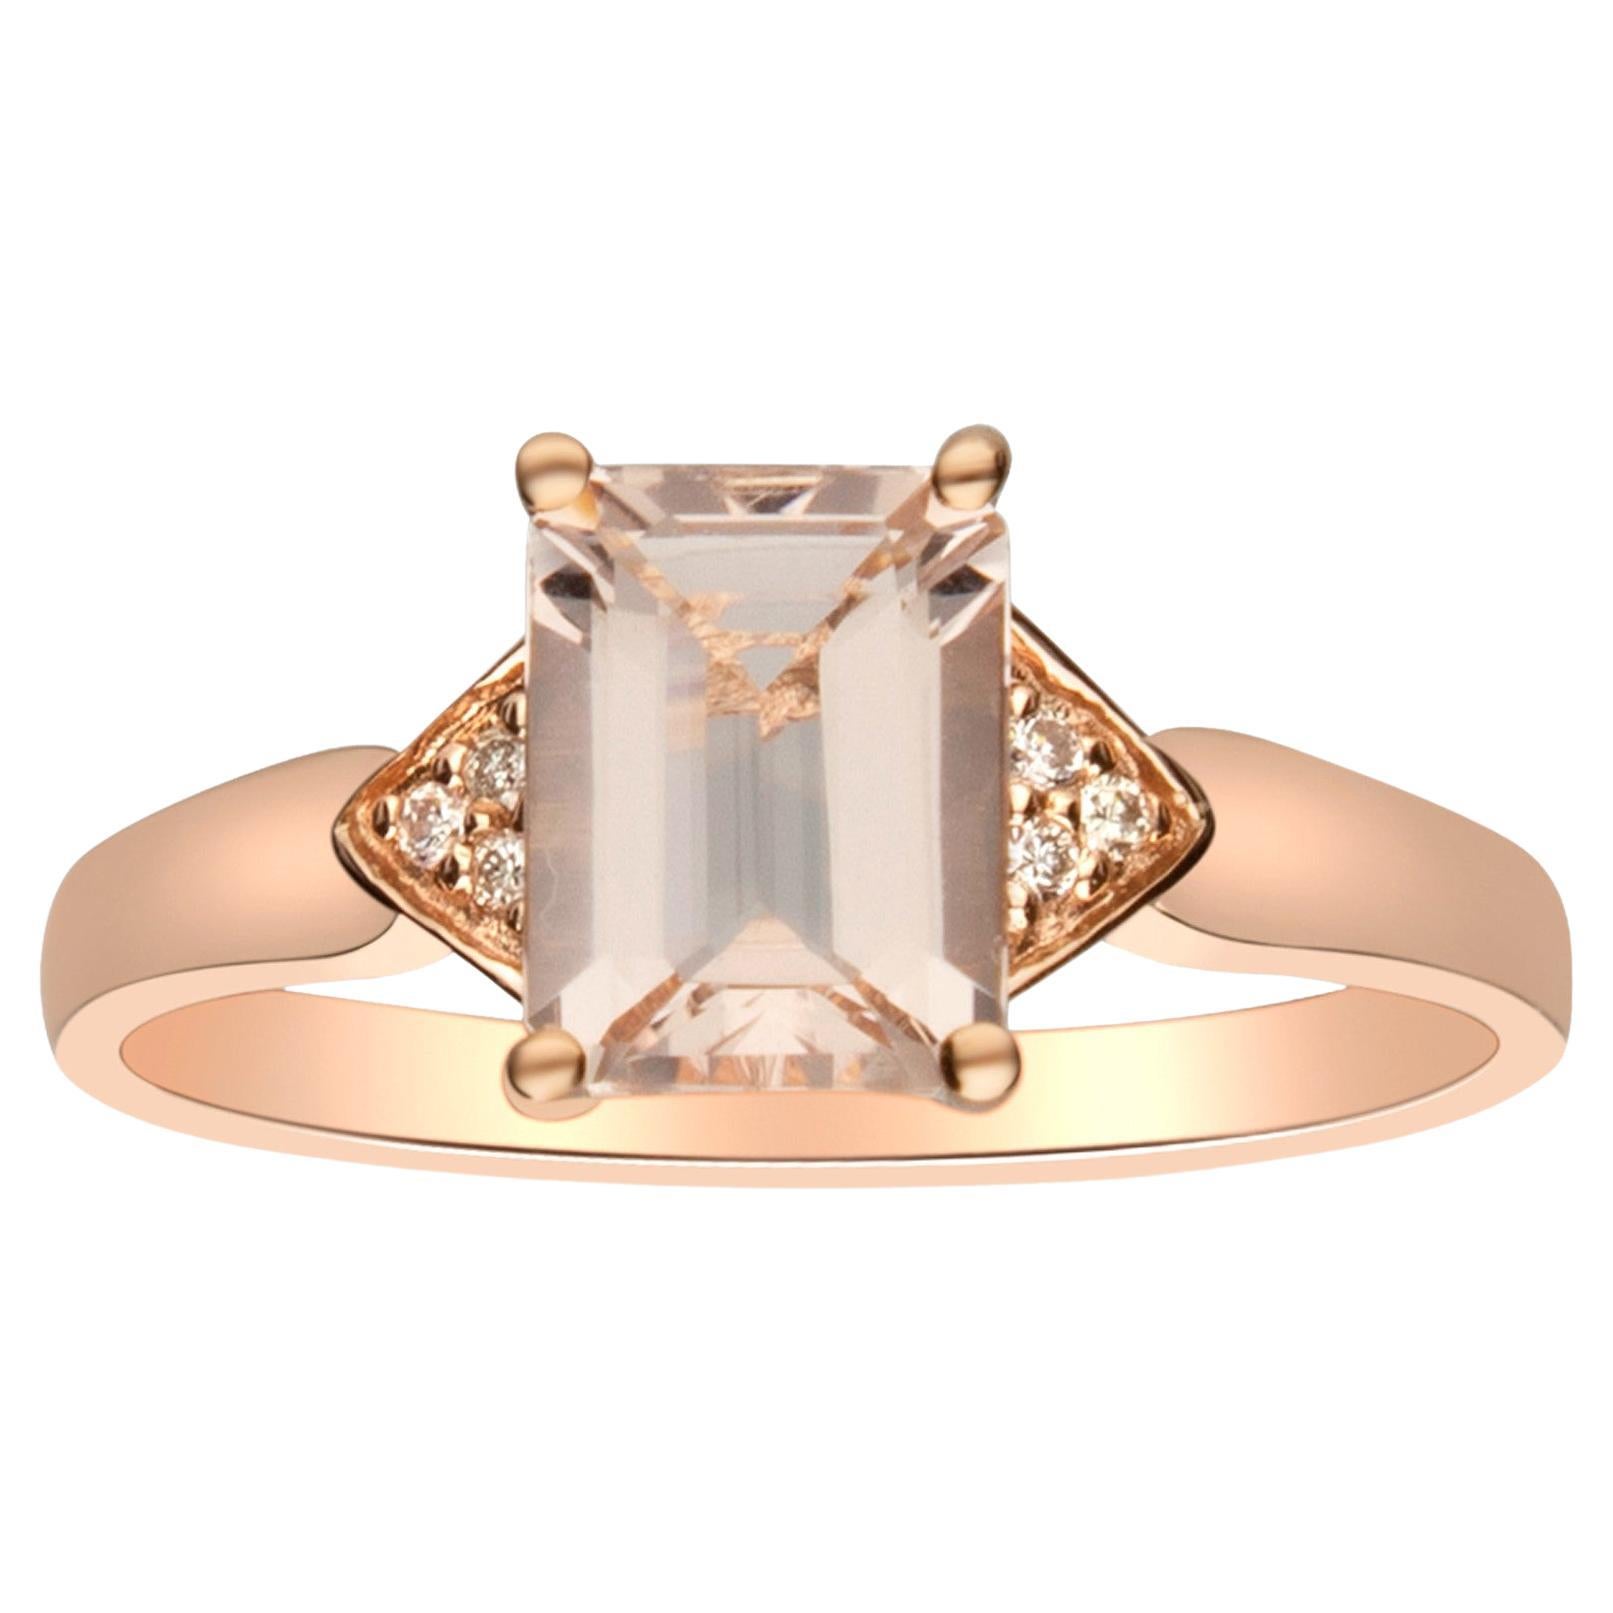 1.28 Carat Cushion-Cut Morganite Diamond Accents 14K Rose Gold Ring For Sale